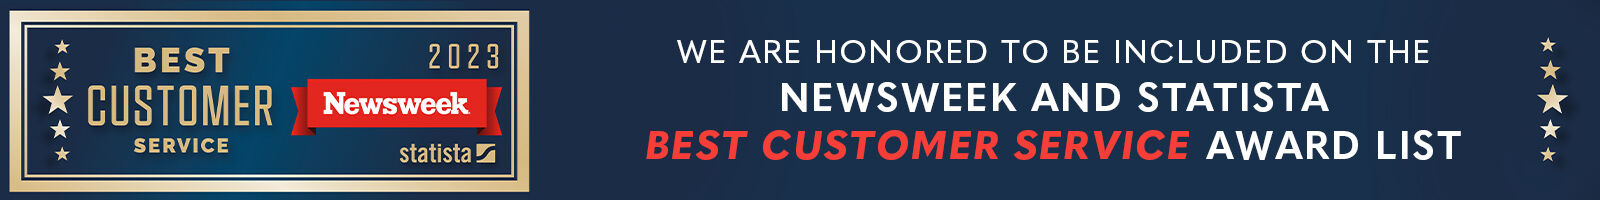 best customer service newsweek 2023 statista we are honored to be included on the newsweek and statista best customer service award list